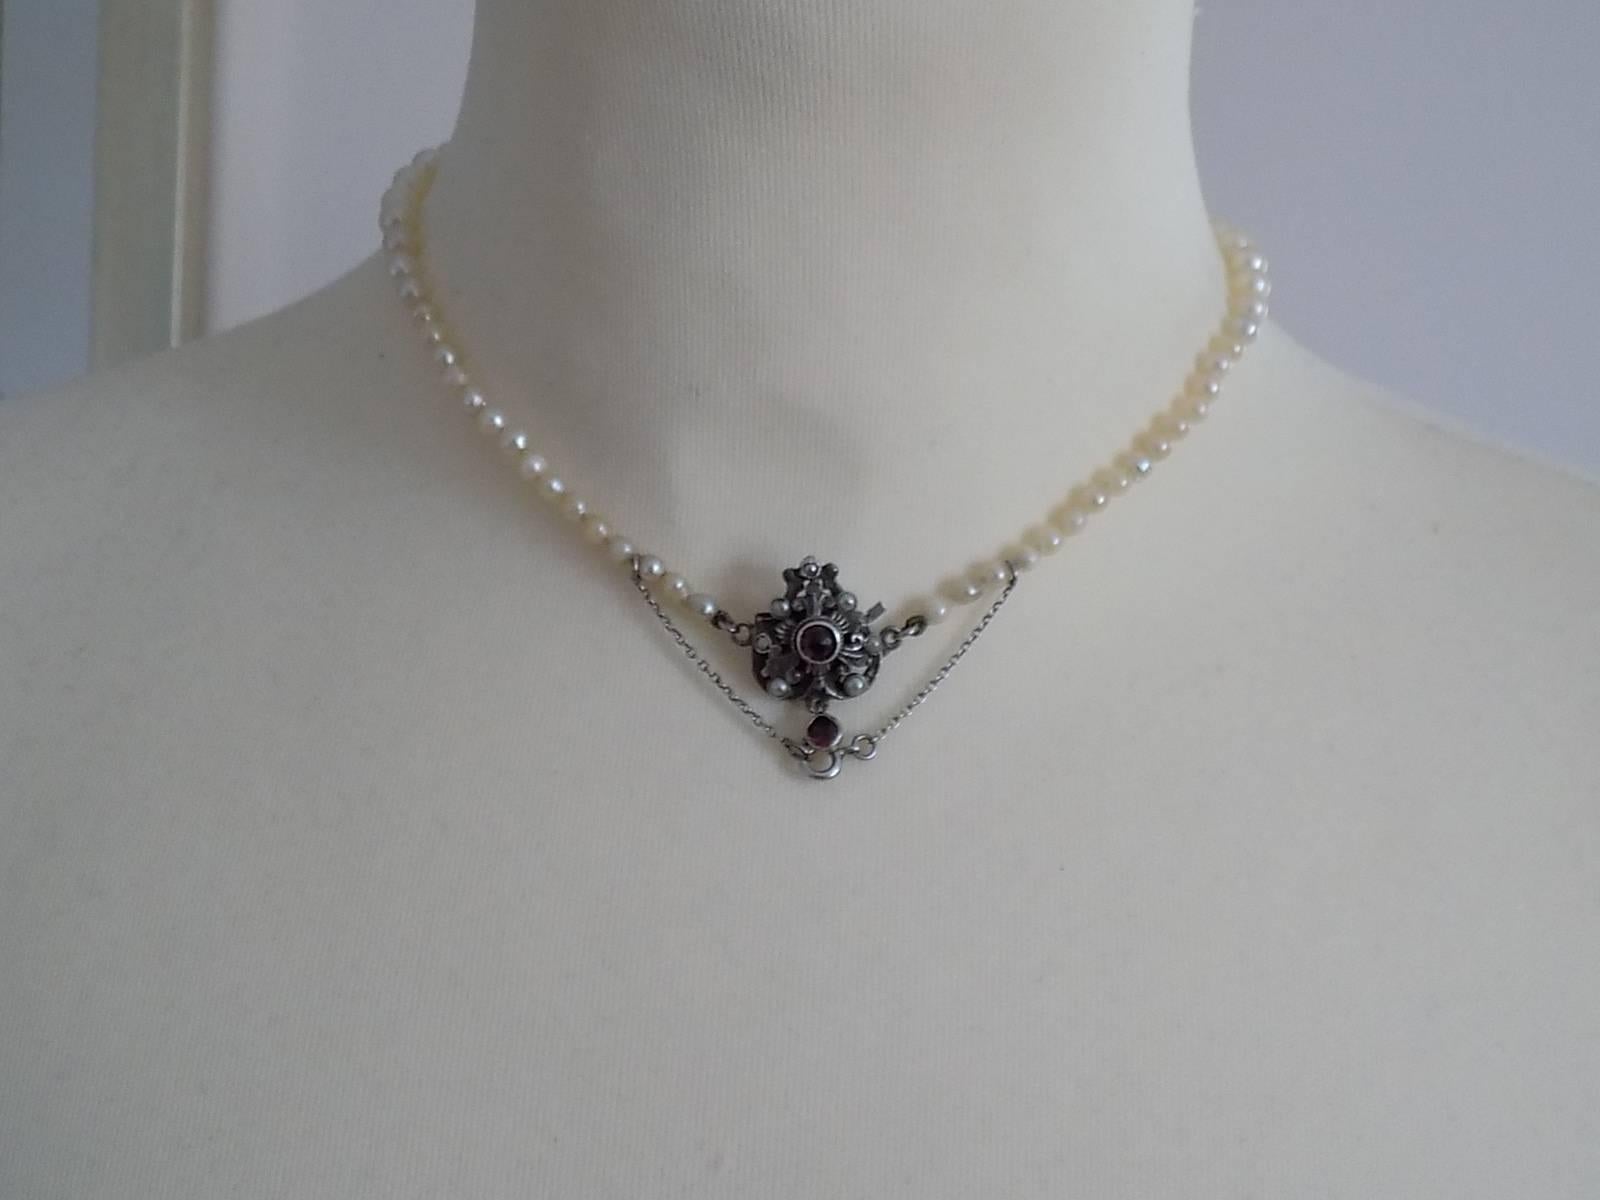 Women's Antique Silver Garnet and Pearl chocker necklace